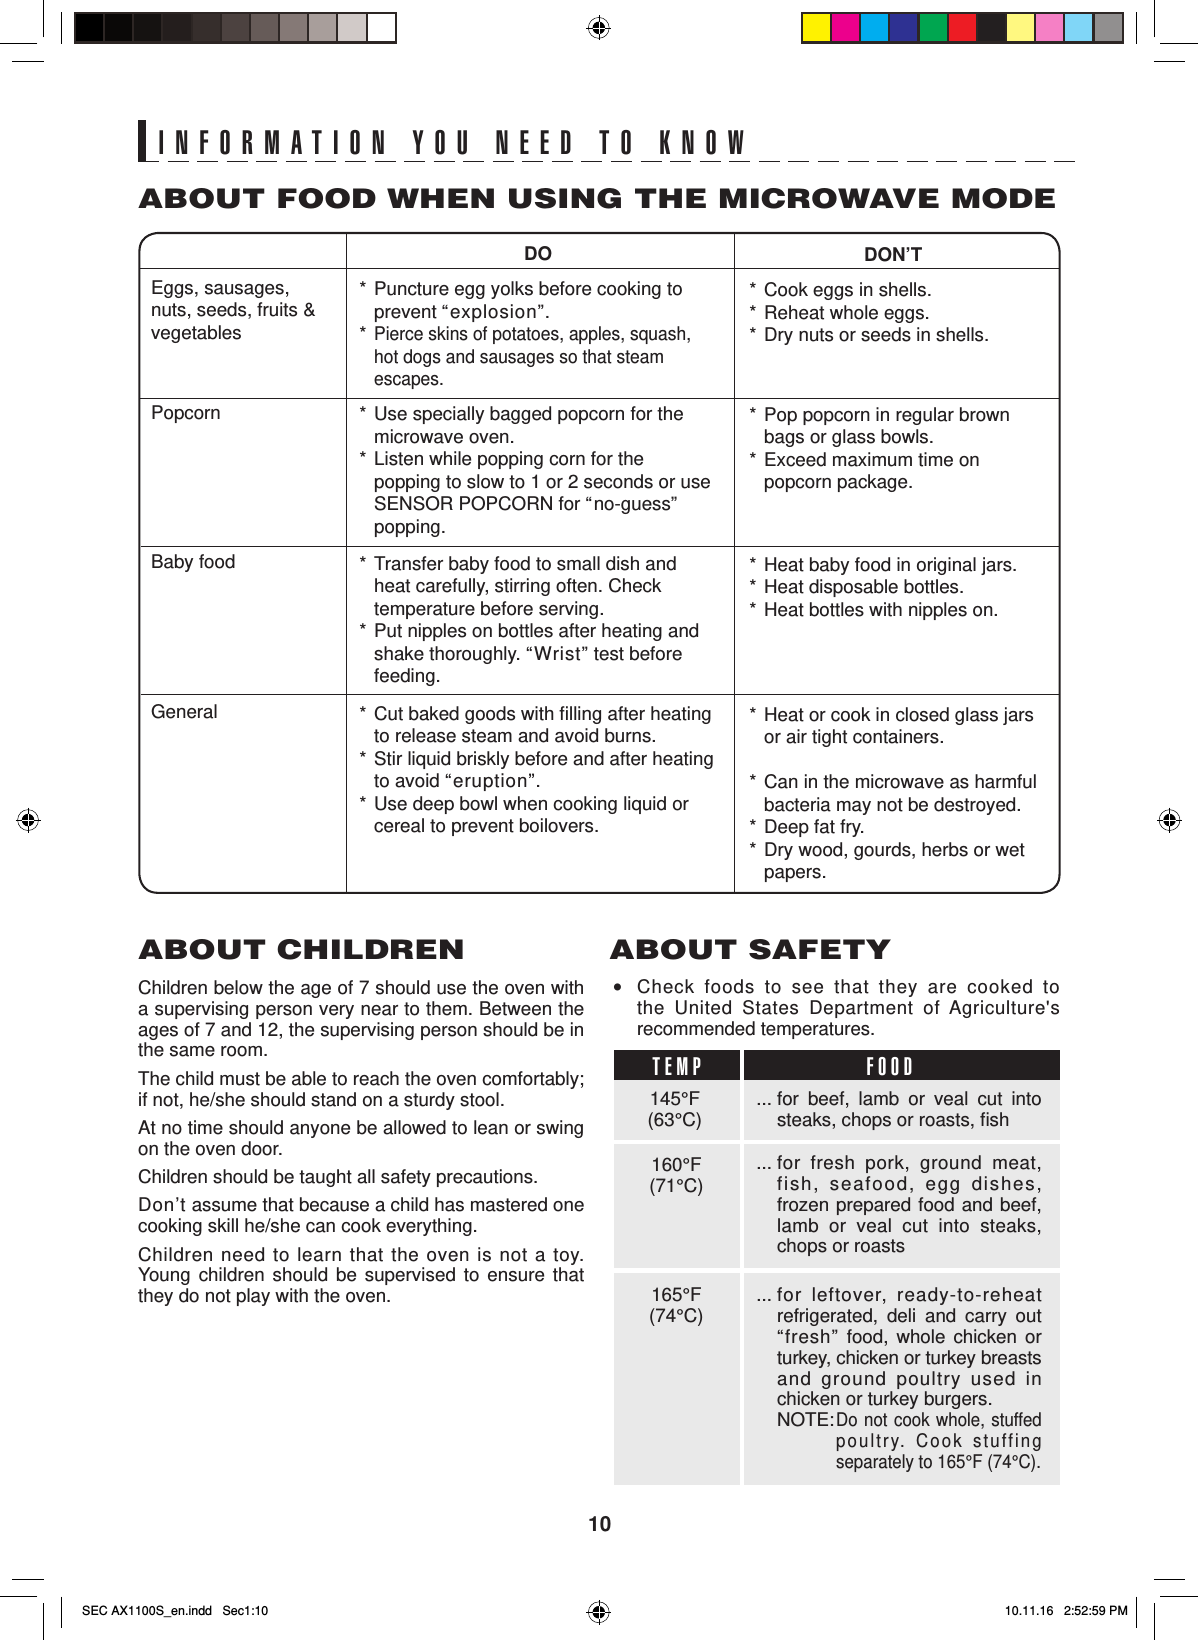 10INFORMATION YOU NEED TO KNOWABOUT CHILDRENChildren below the age of 7 should use the oven with a supervising person very near to them. Between the ages of 7 and 12, the supervising person should be in the same room.The child must be able to reach the oven comfortably; if not, he/she should stand on a sturdy stool.At no time should anyone be allowed to lean or swing on the oven door.Children should be taught all safety precautions.Don’t assume that because a child has mastered one cooking skill he/she can cook everything.Children need to learn that the oven is not a toy. Young children should be supervised to ensure that they do not play with the oven.DON’T*  Cook eggs in shells.*  Reheat whole eggs.*  Dry nuts or seeds in shells.*  Pop popcorn in regular brown bags or glass bowls.*  Exceed maximum time on popcorn package.*  Heat baby food in original jars.*  Heat disposable bottles.*  Heat bottles with nipples on.*  Heat or cook in closed glass jars or air tight containers.*  Can in the microwave as harmful bacteria may not be destroyed.*  Deep fat fry.*  Dry wood, gourds, herbs or wet papers.DO*  Puncture egg yolks before cooking to prevent “explosion”.*  Pierce skins of potatoes, apples, squash, hot dogs and sausages so that steam escapes.*  Use specially bagged popcorn for the microwave oven.*  Listen while popping corn for the popping to slow to 1 or 2 seconds or use  SENSOR POPCORN for “no-guess” popping.*  Transfer baby food to small dish and heat carefully, stirring often. Check temperature before serving.*  Put nipples on bottles after heating and shake thoroughly. “Wrist” test before feeding.*  Cut baked goods with ﬁ lling after heating to release steam and avoid burns.*  Stir liquid briskly before and after heating to avoid “eruption”.*  Use deep bowl when cooking liquid or cereal to prevent boilovers.Eggs, sausages, nuts, seeds, fruits &amp; vegetablesPopcornBaby foodGeneralABOUT FOOD WHEN USING THE MICROWAVE MODE• Check foods to see that they are cooked to the United States Department of Agriculture&apos;s recommended temperatures.ABOUT SAFETY... for beef, lamb or veal cut into steaks, chops or roasts, ﬁ sh... for  fresh pork, ground meat, fish, seafood, egg dishes, frozen prepared food and beef, lamb or veal cut into steaks, chops or roasts... for  leftover, ready-to-reheat refrigerated, deli and carry out “fresh” food, whole chicken or turkey, chicken or turkey breasts and ground poultry used in chicken or turkey burgers.   NOTE: Do not cook whole, stuffed   poultry. Cook stuffing   separately to 165°F (74°C).145°F(63°C)TEMP FOOD160°F(71°C)165°F(74°C)SEC AX1100S_en.indd   Sec1:10SEC AX1100S_en.indd   Sec1:10 10.11.16   2:52:59 PM10.11.16   2:52:59 PM